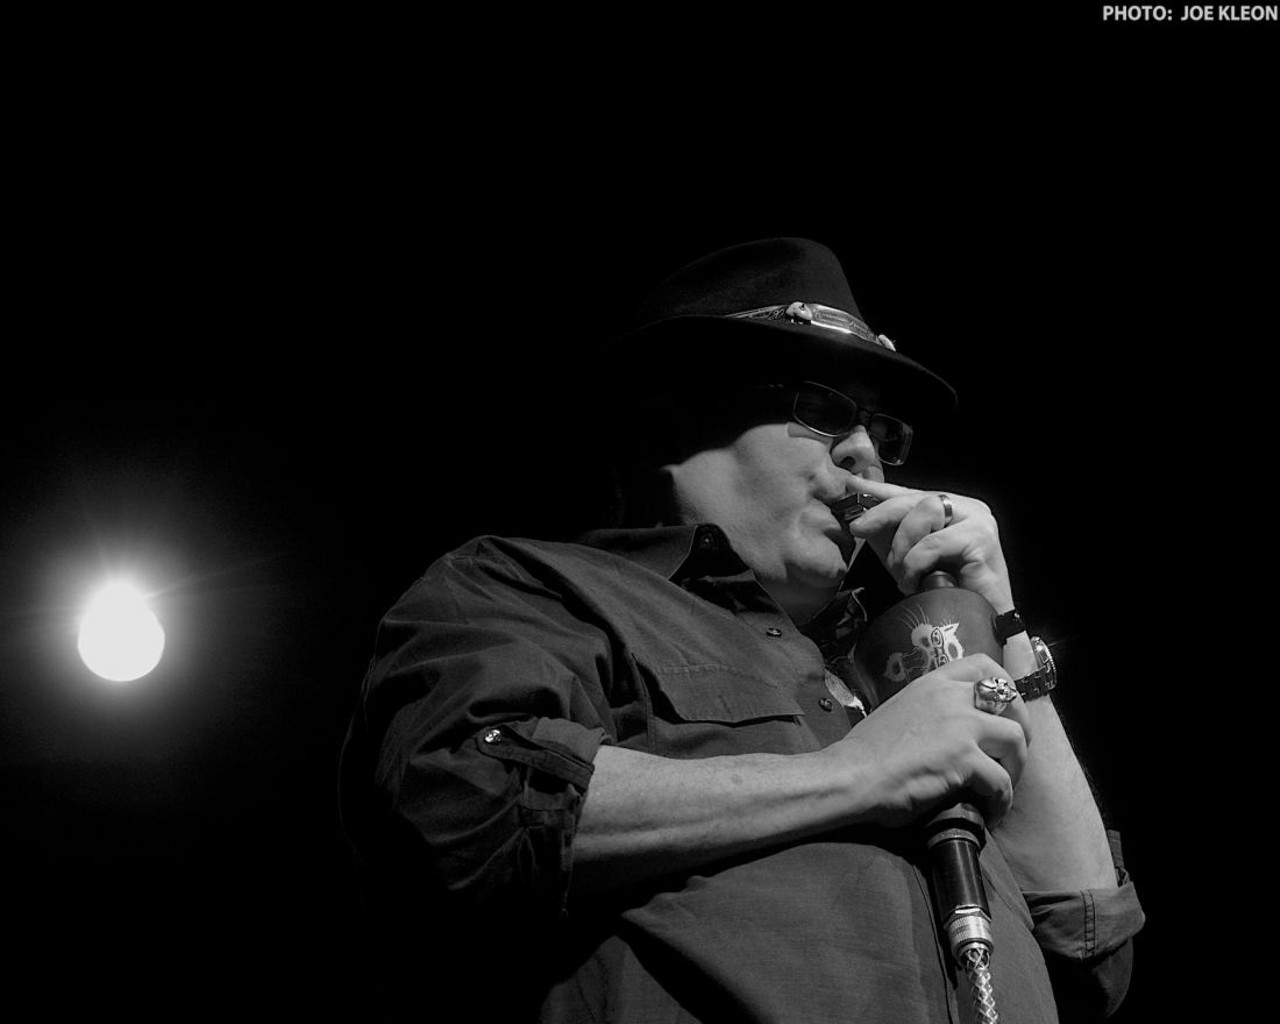 Blues Traveler Performing at the Kent Stage